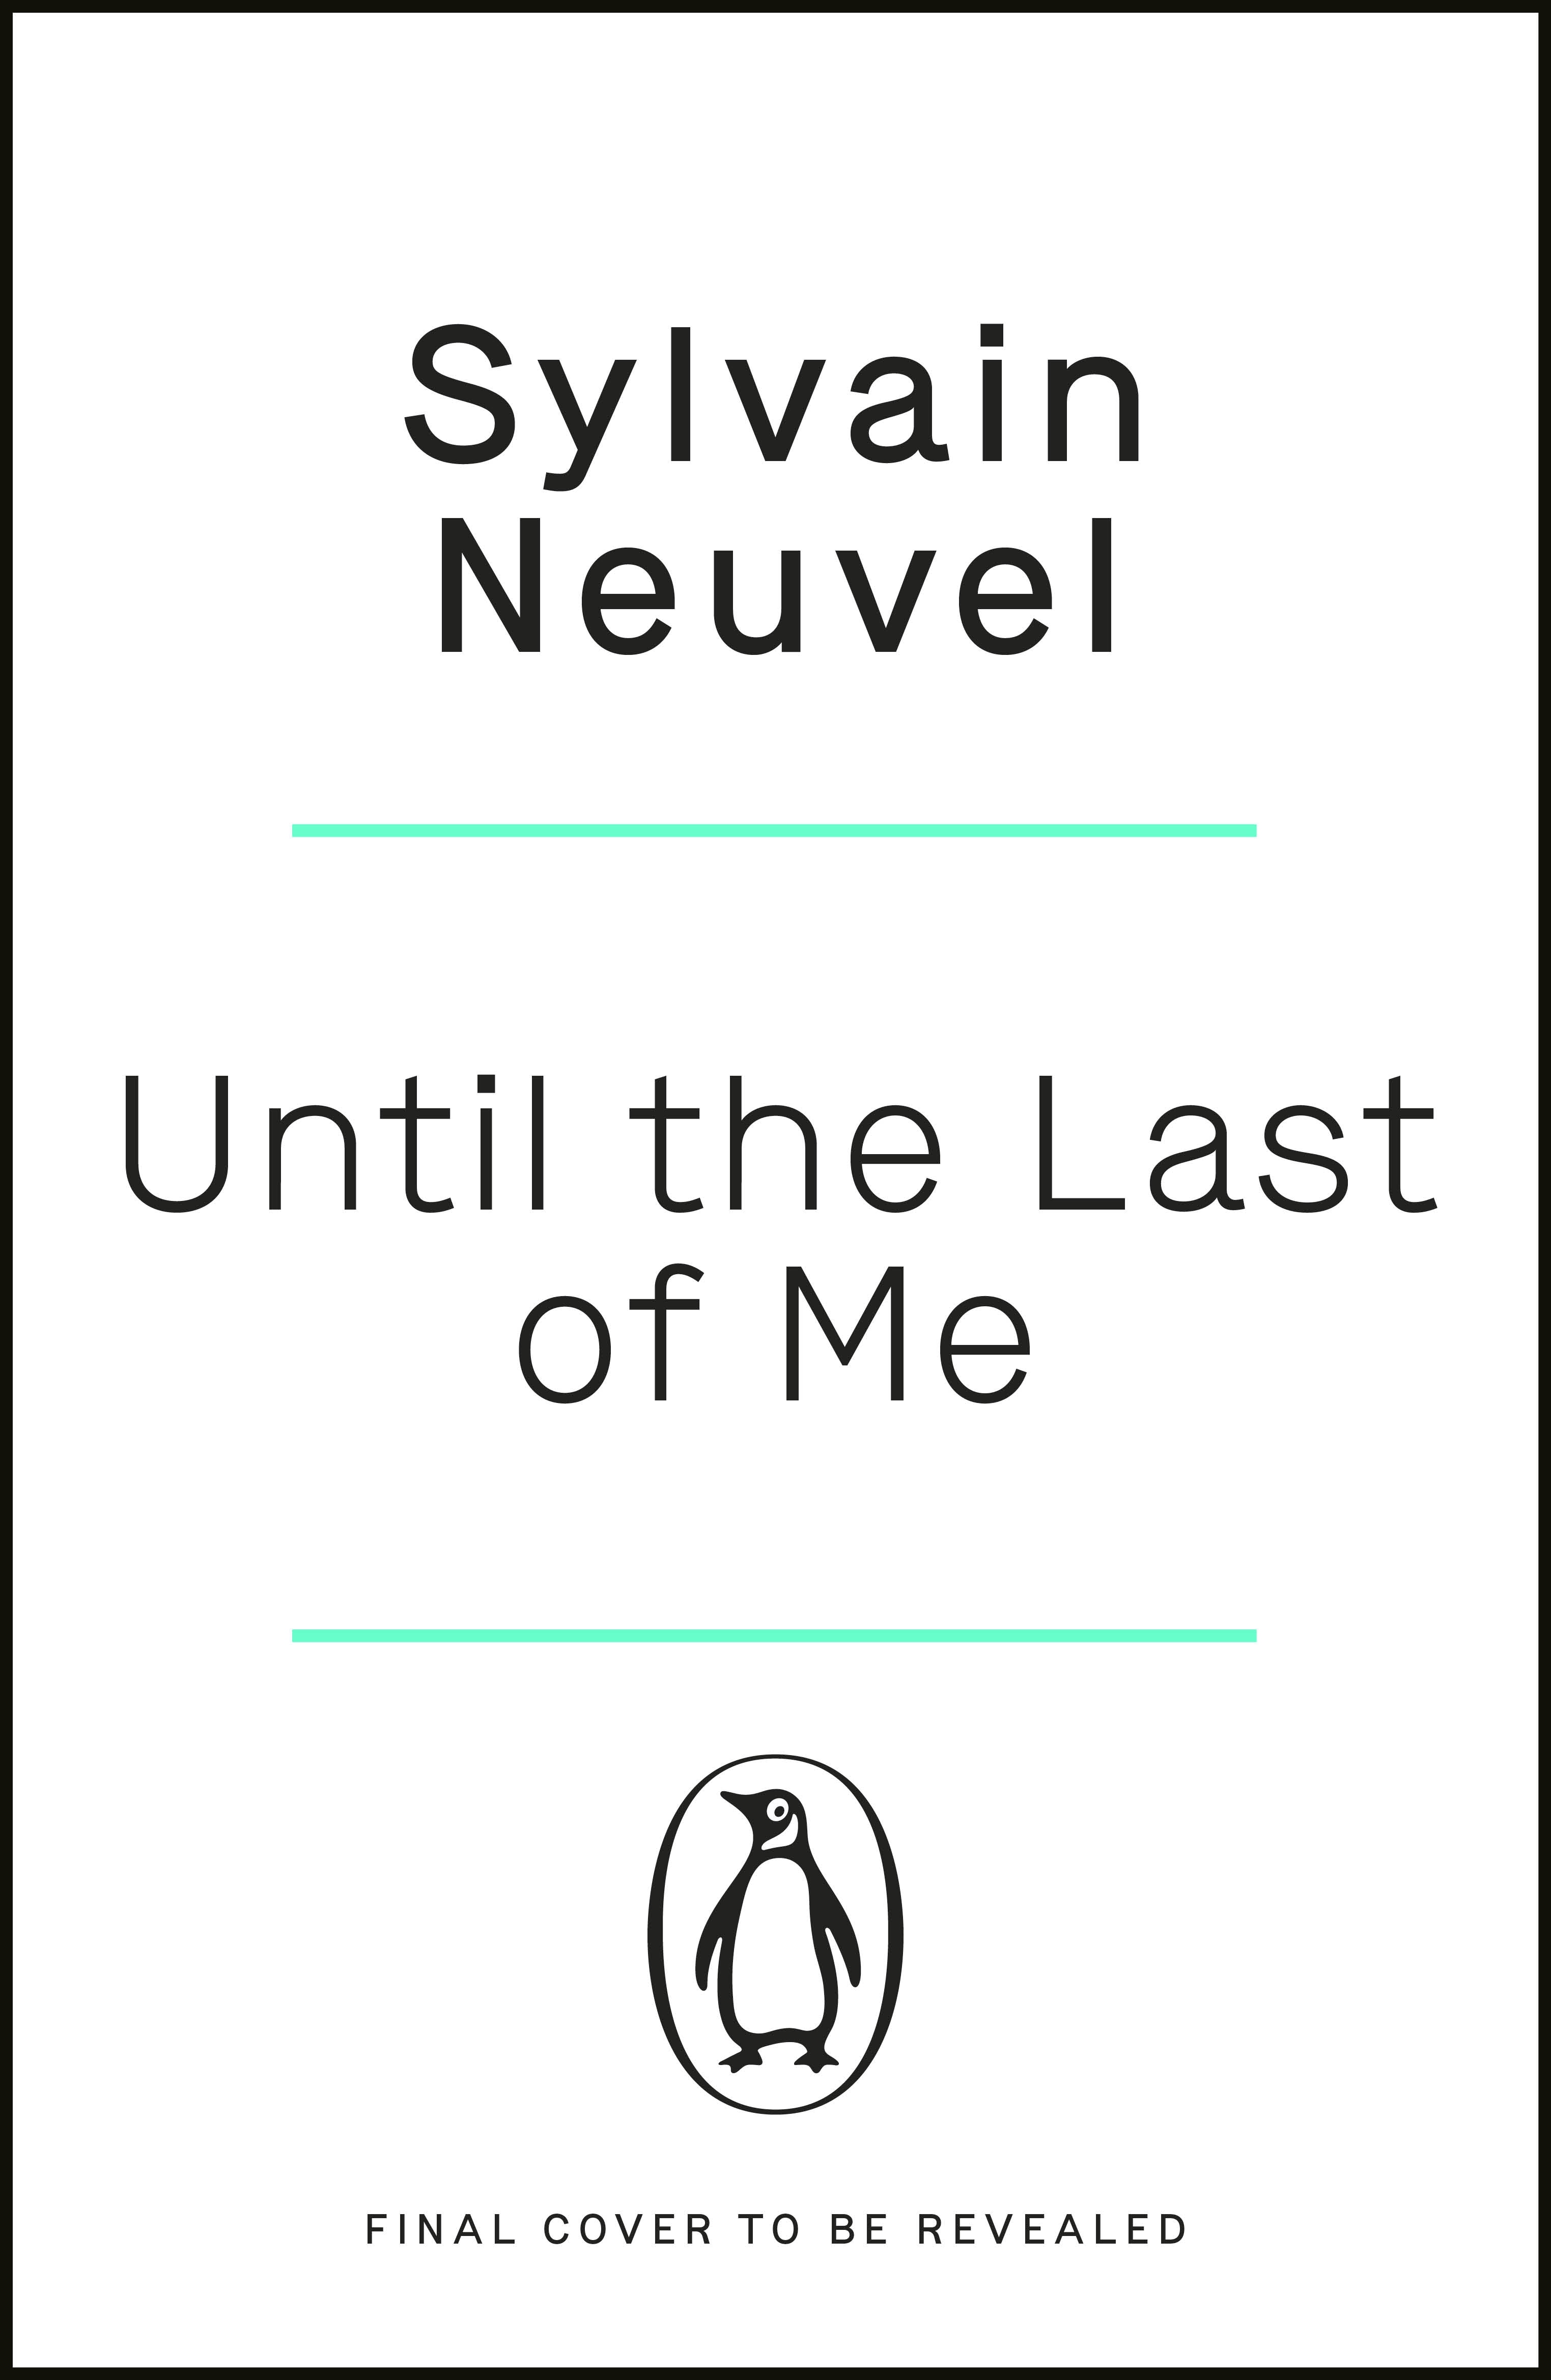 Book “Until the Last of Me” by Sylvain Neuvel — October 13, 2022